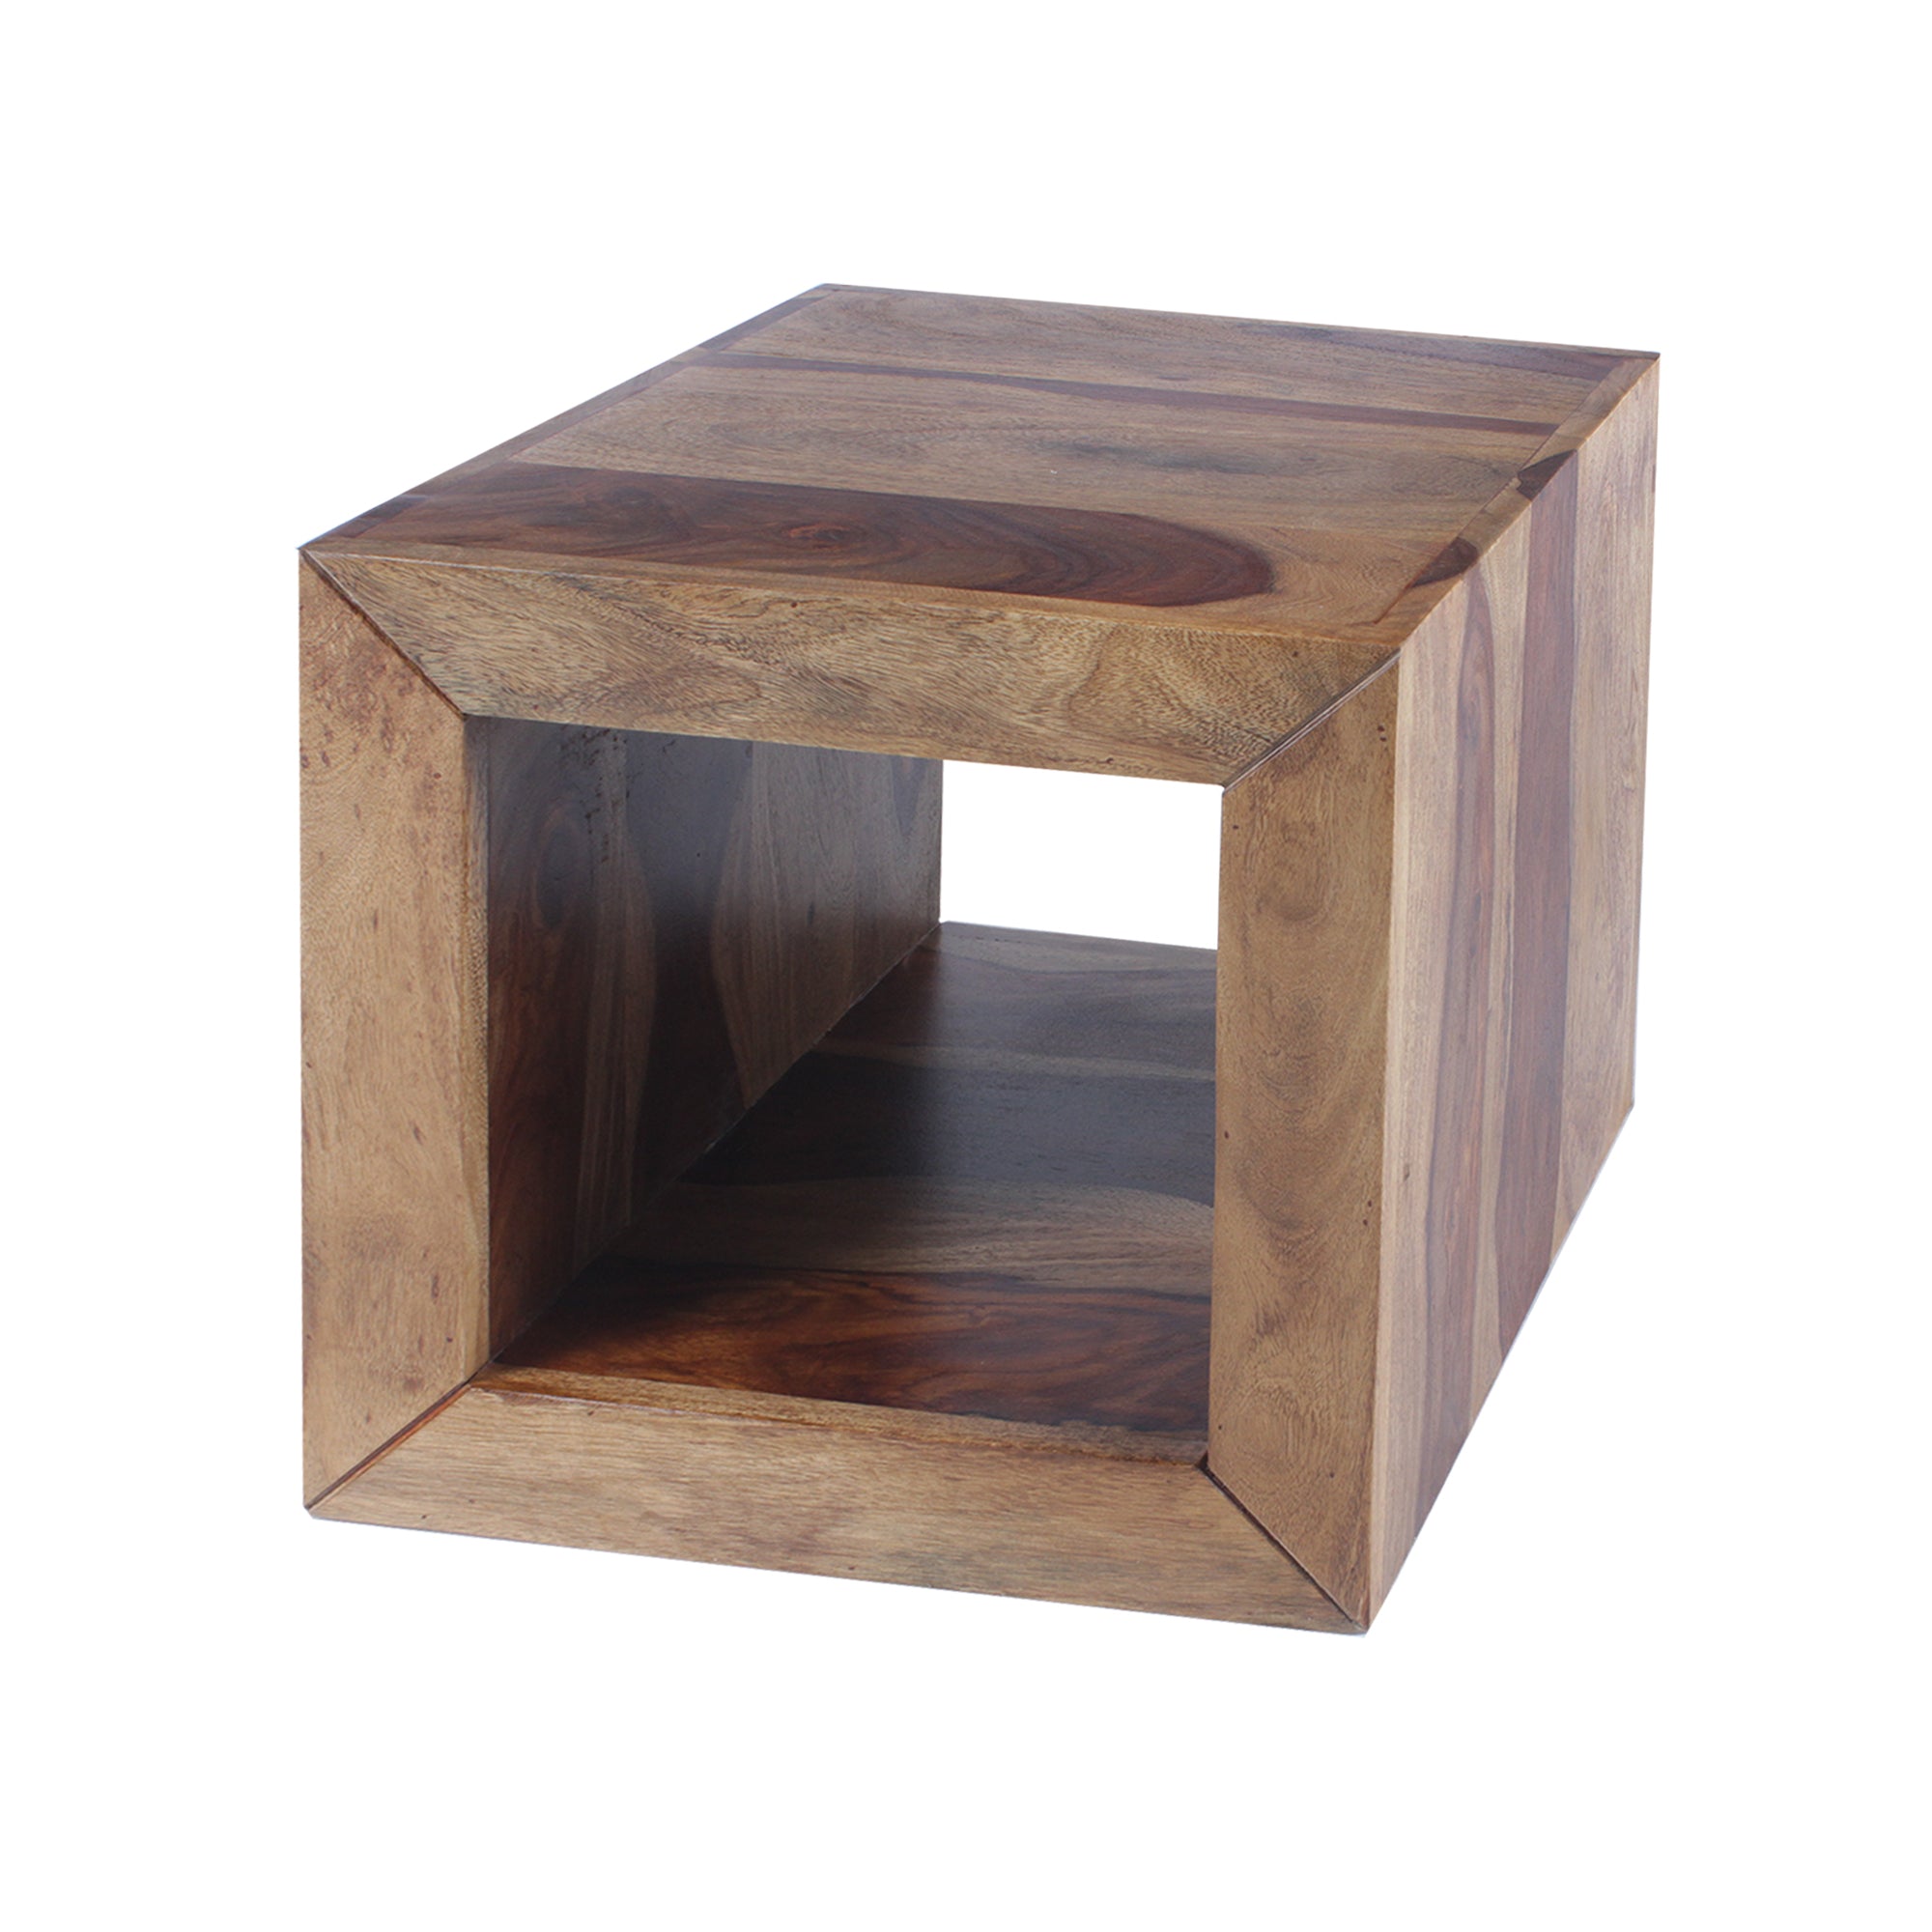 Photo 1 of Cube Shape Rosewood Side Table With Cutout Bottom, Brown